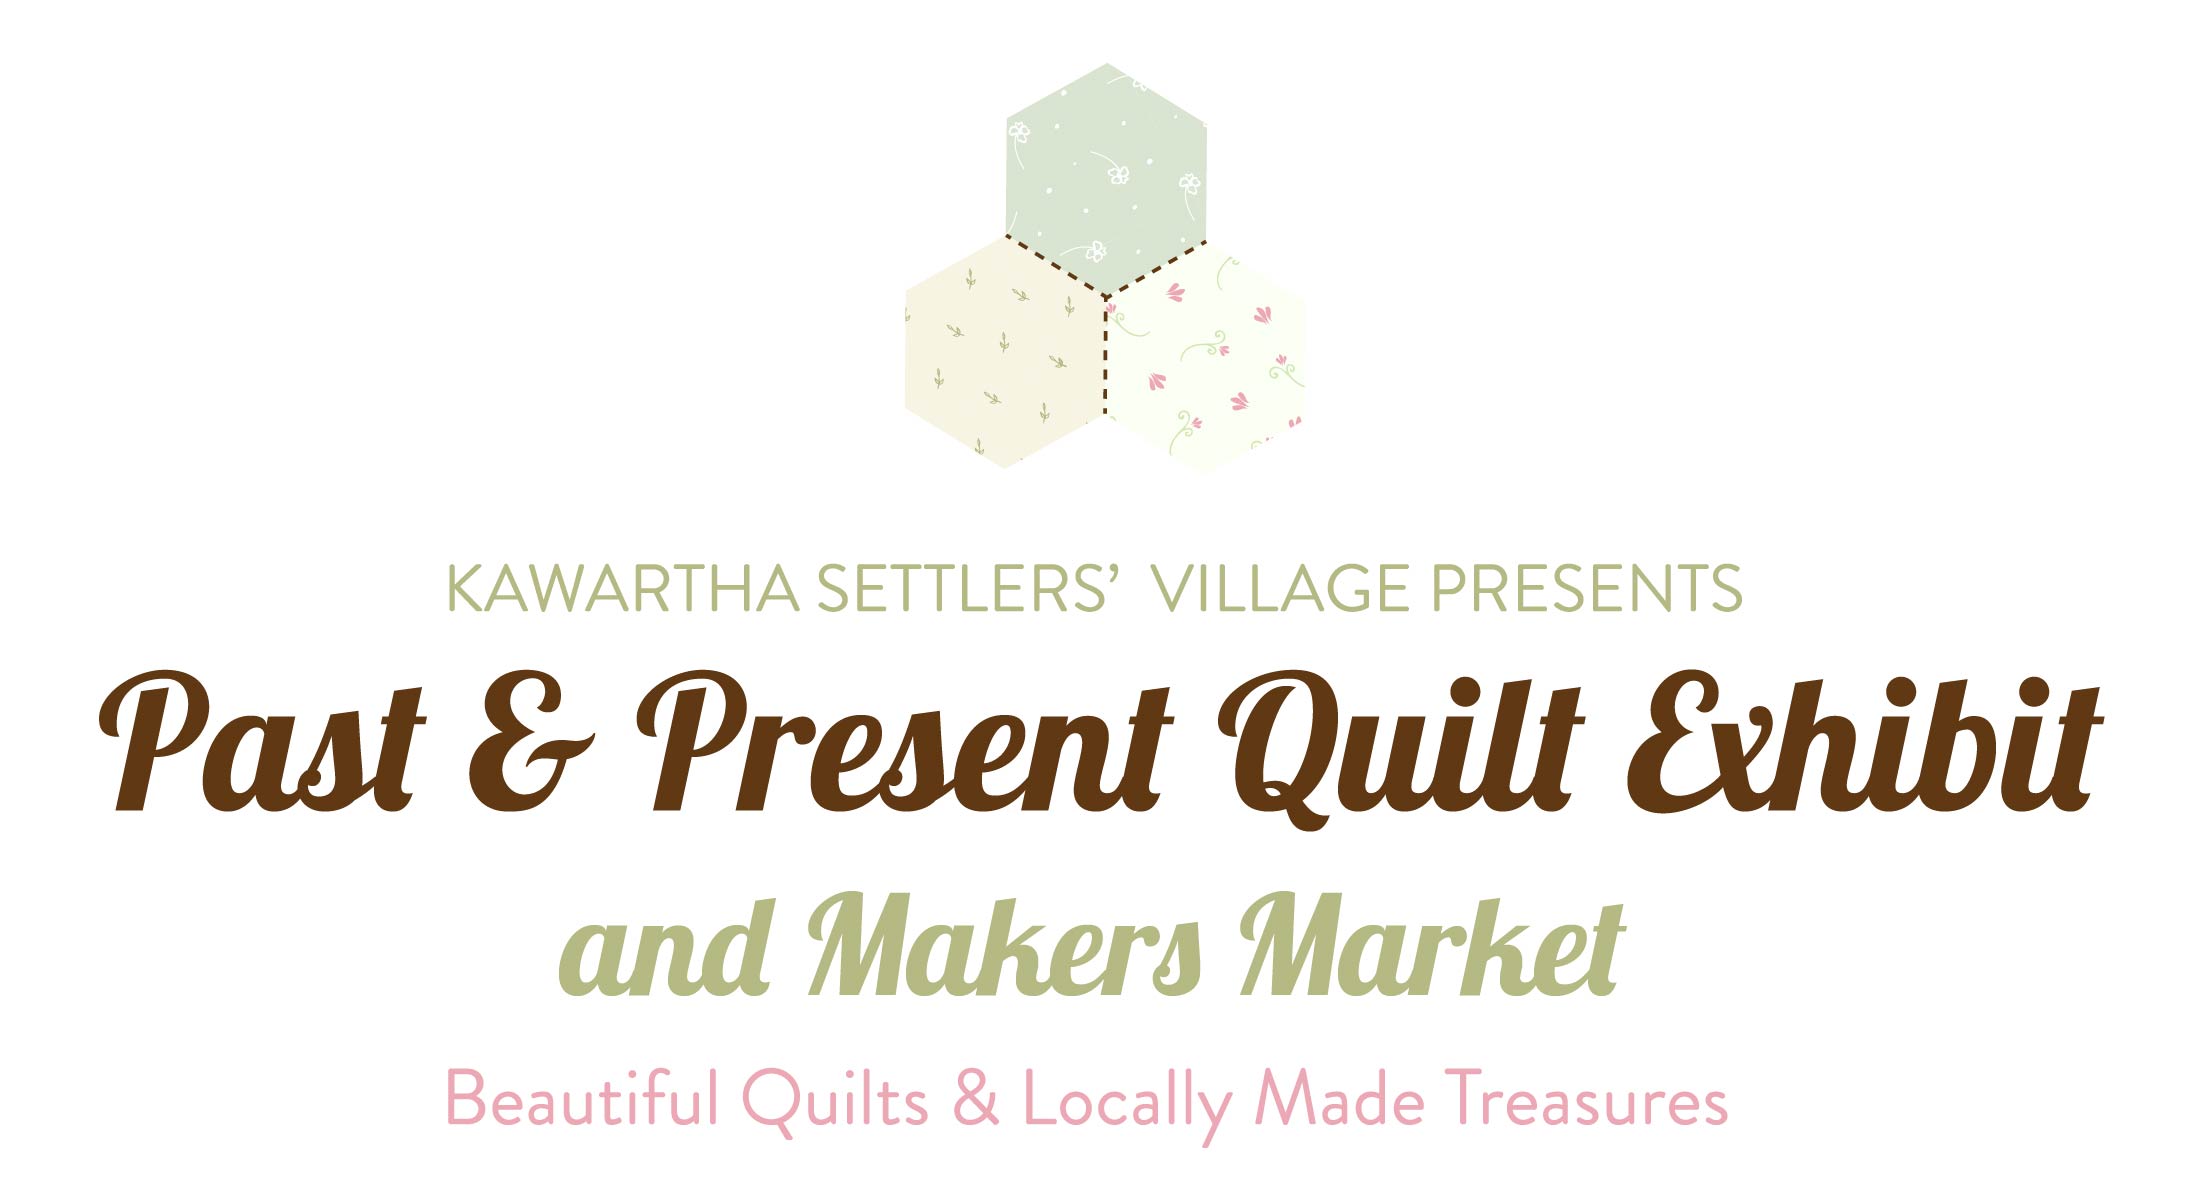 Past & Present Quilt Showcase and Makers Market